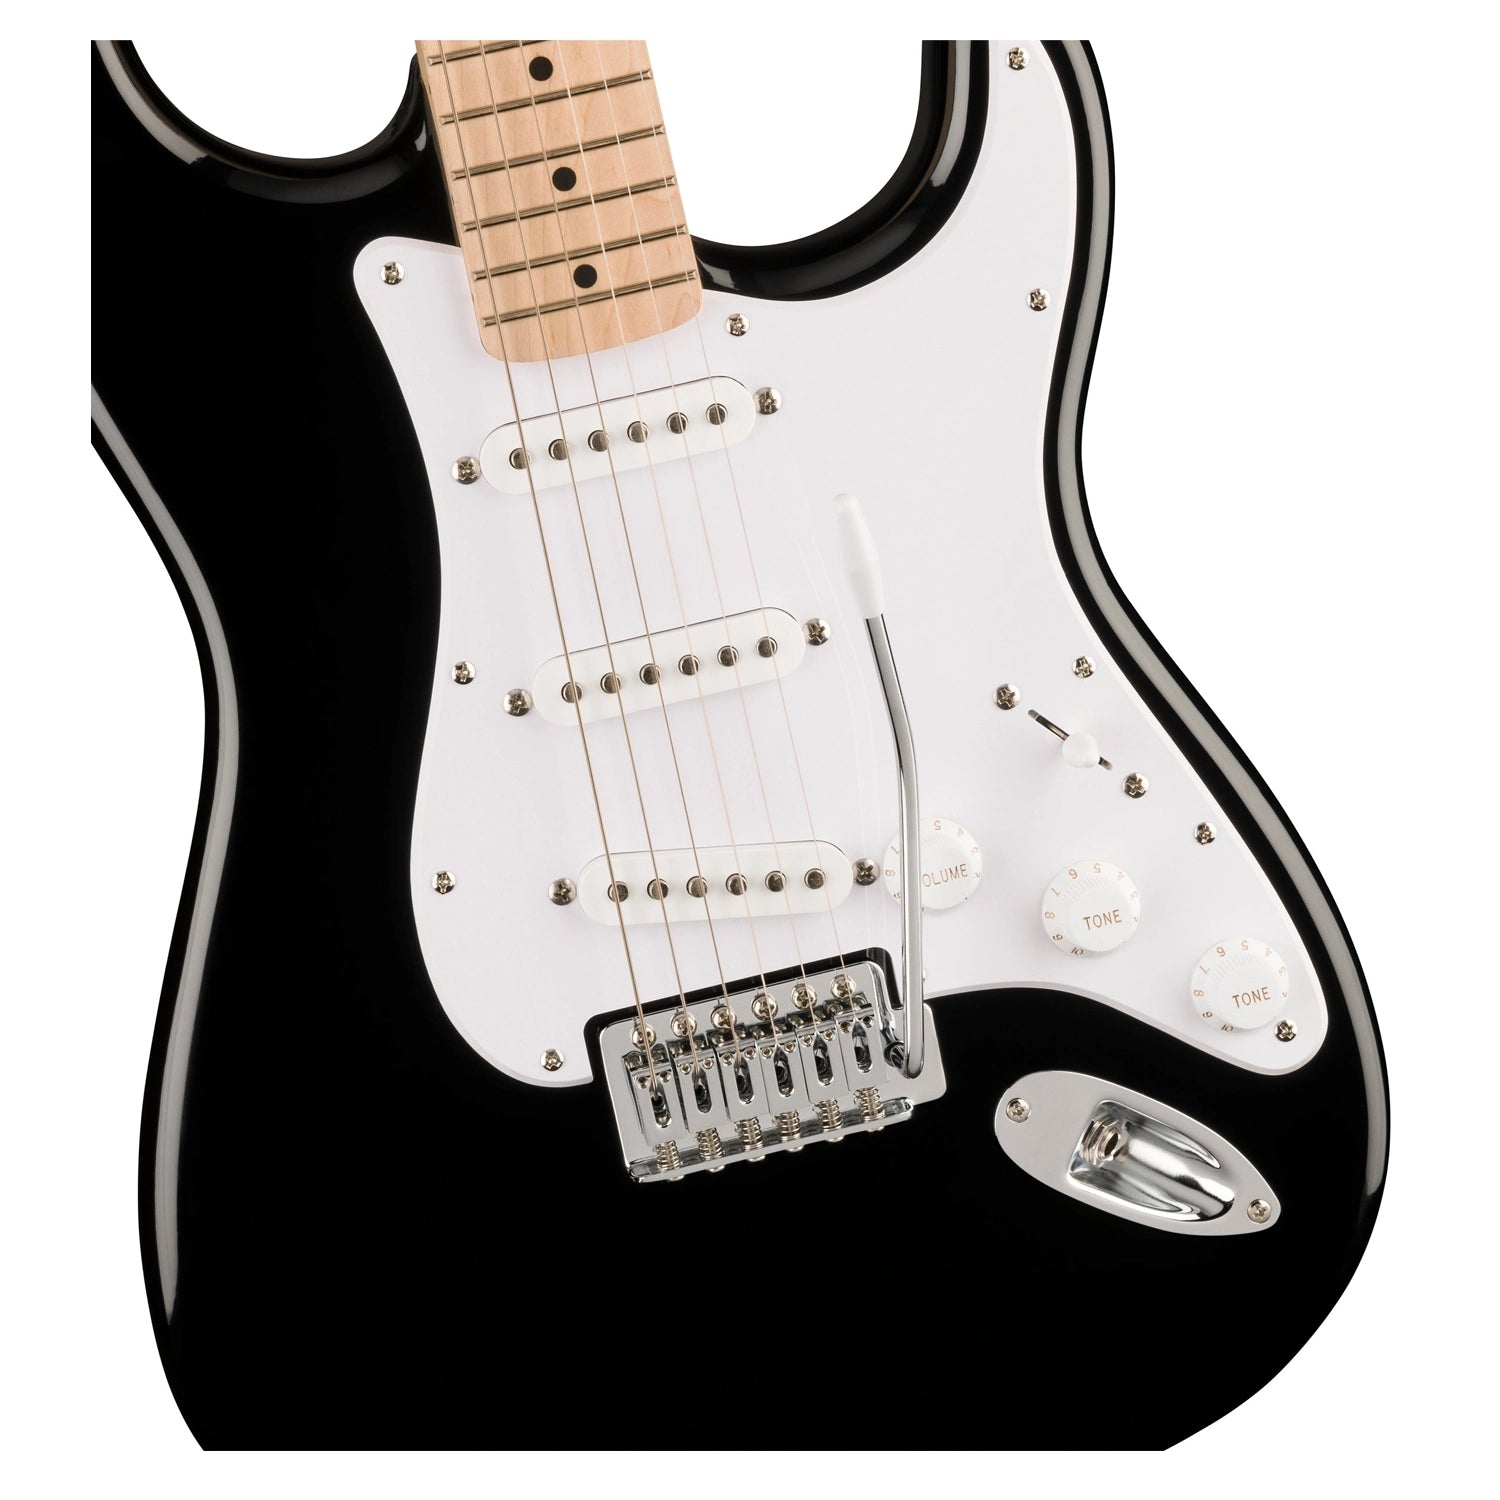 Squier Sonic Stratocaster Electric Guitar - Black